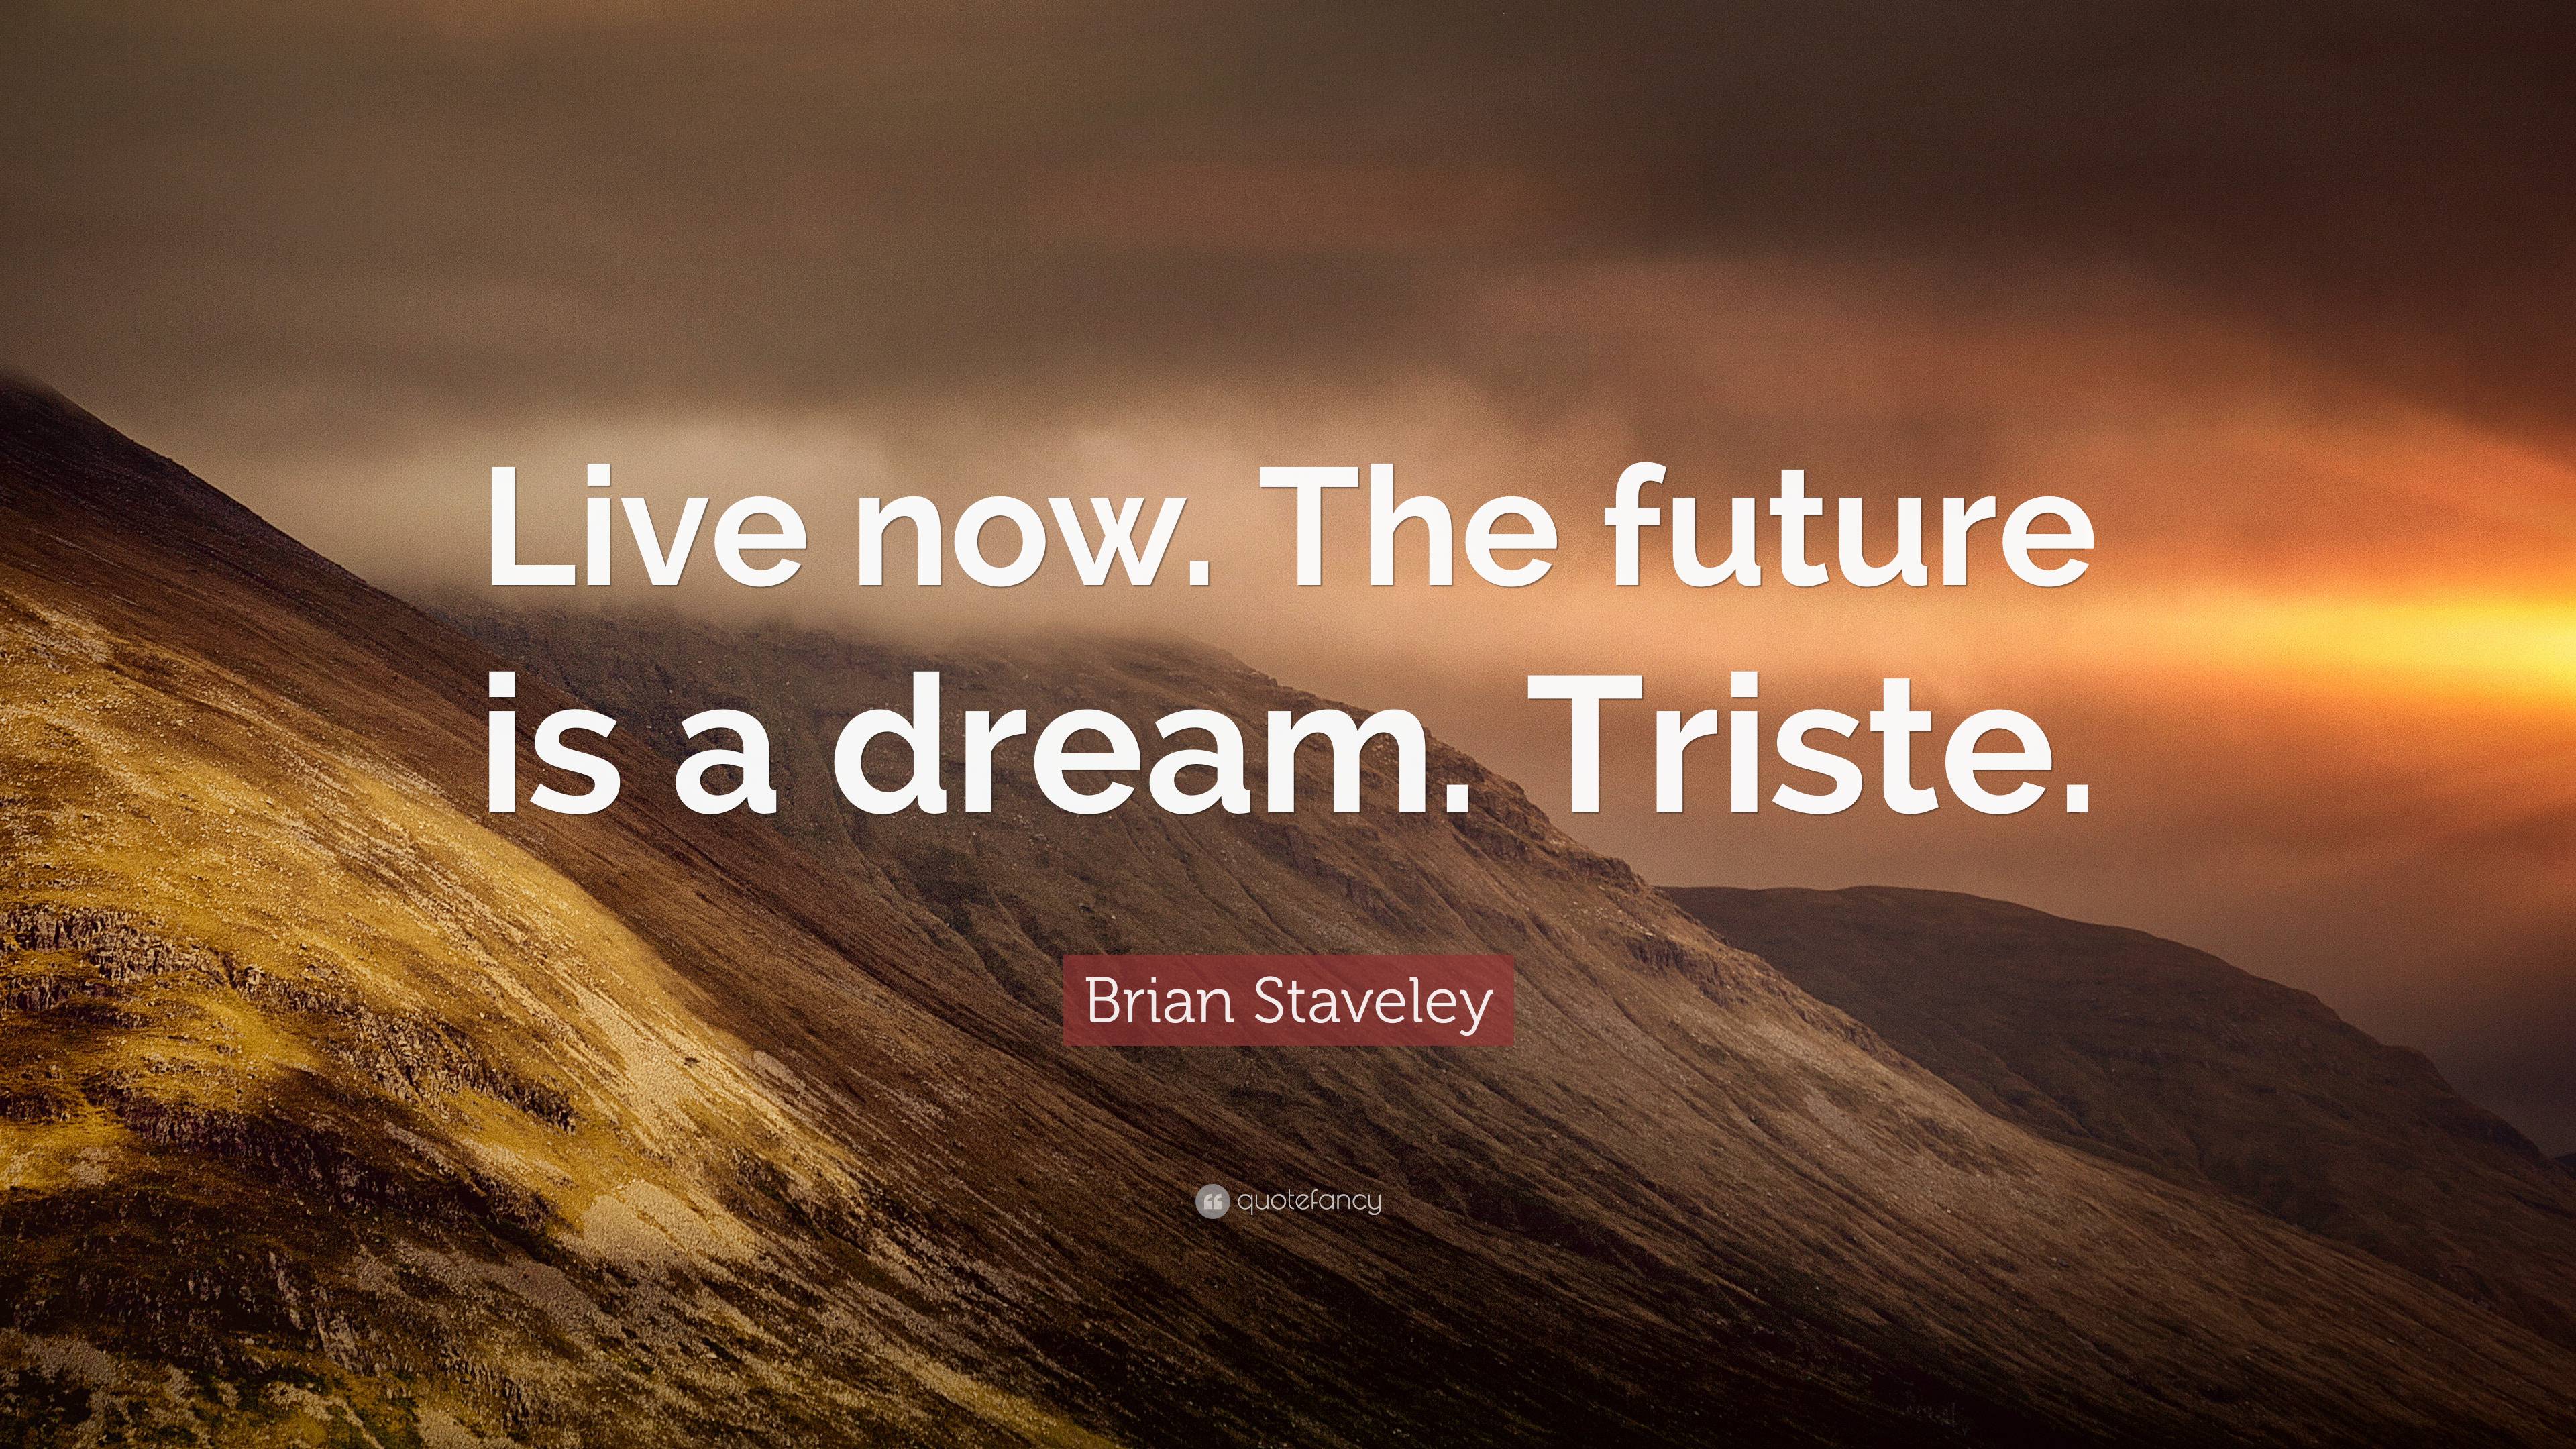 Brian Staveley Quote: “Live now. The future is a dream. Triste.”